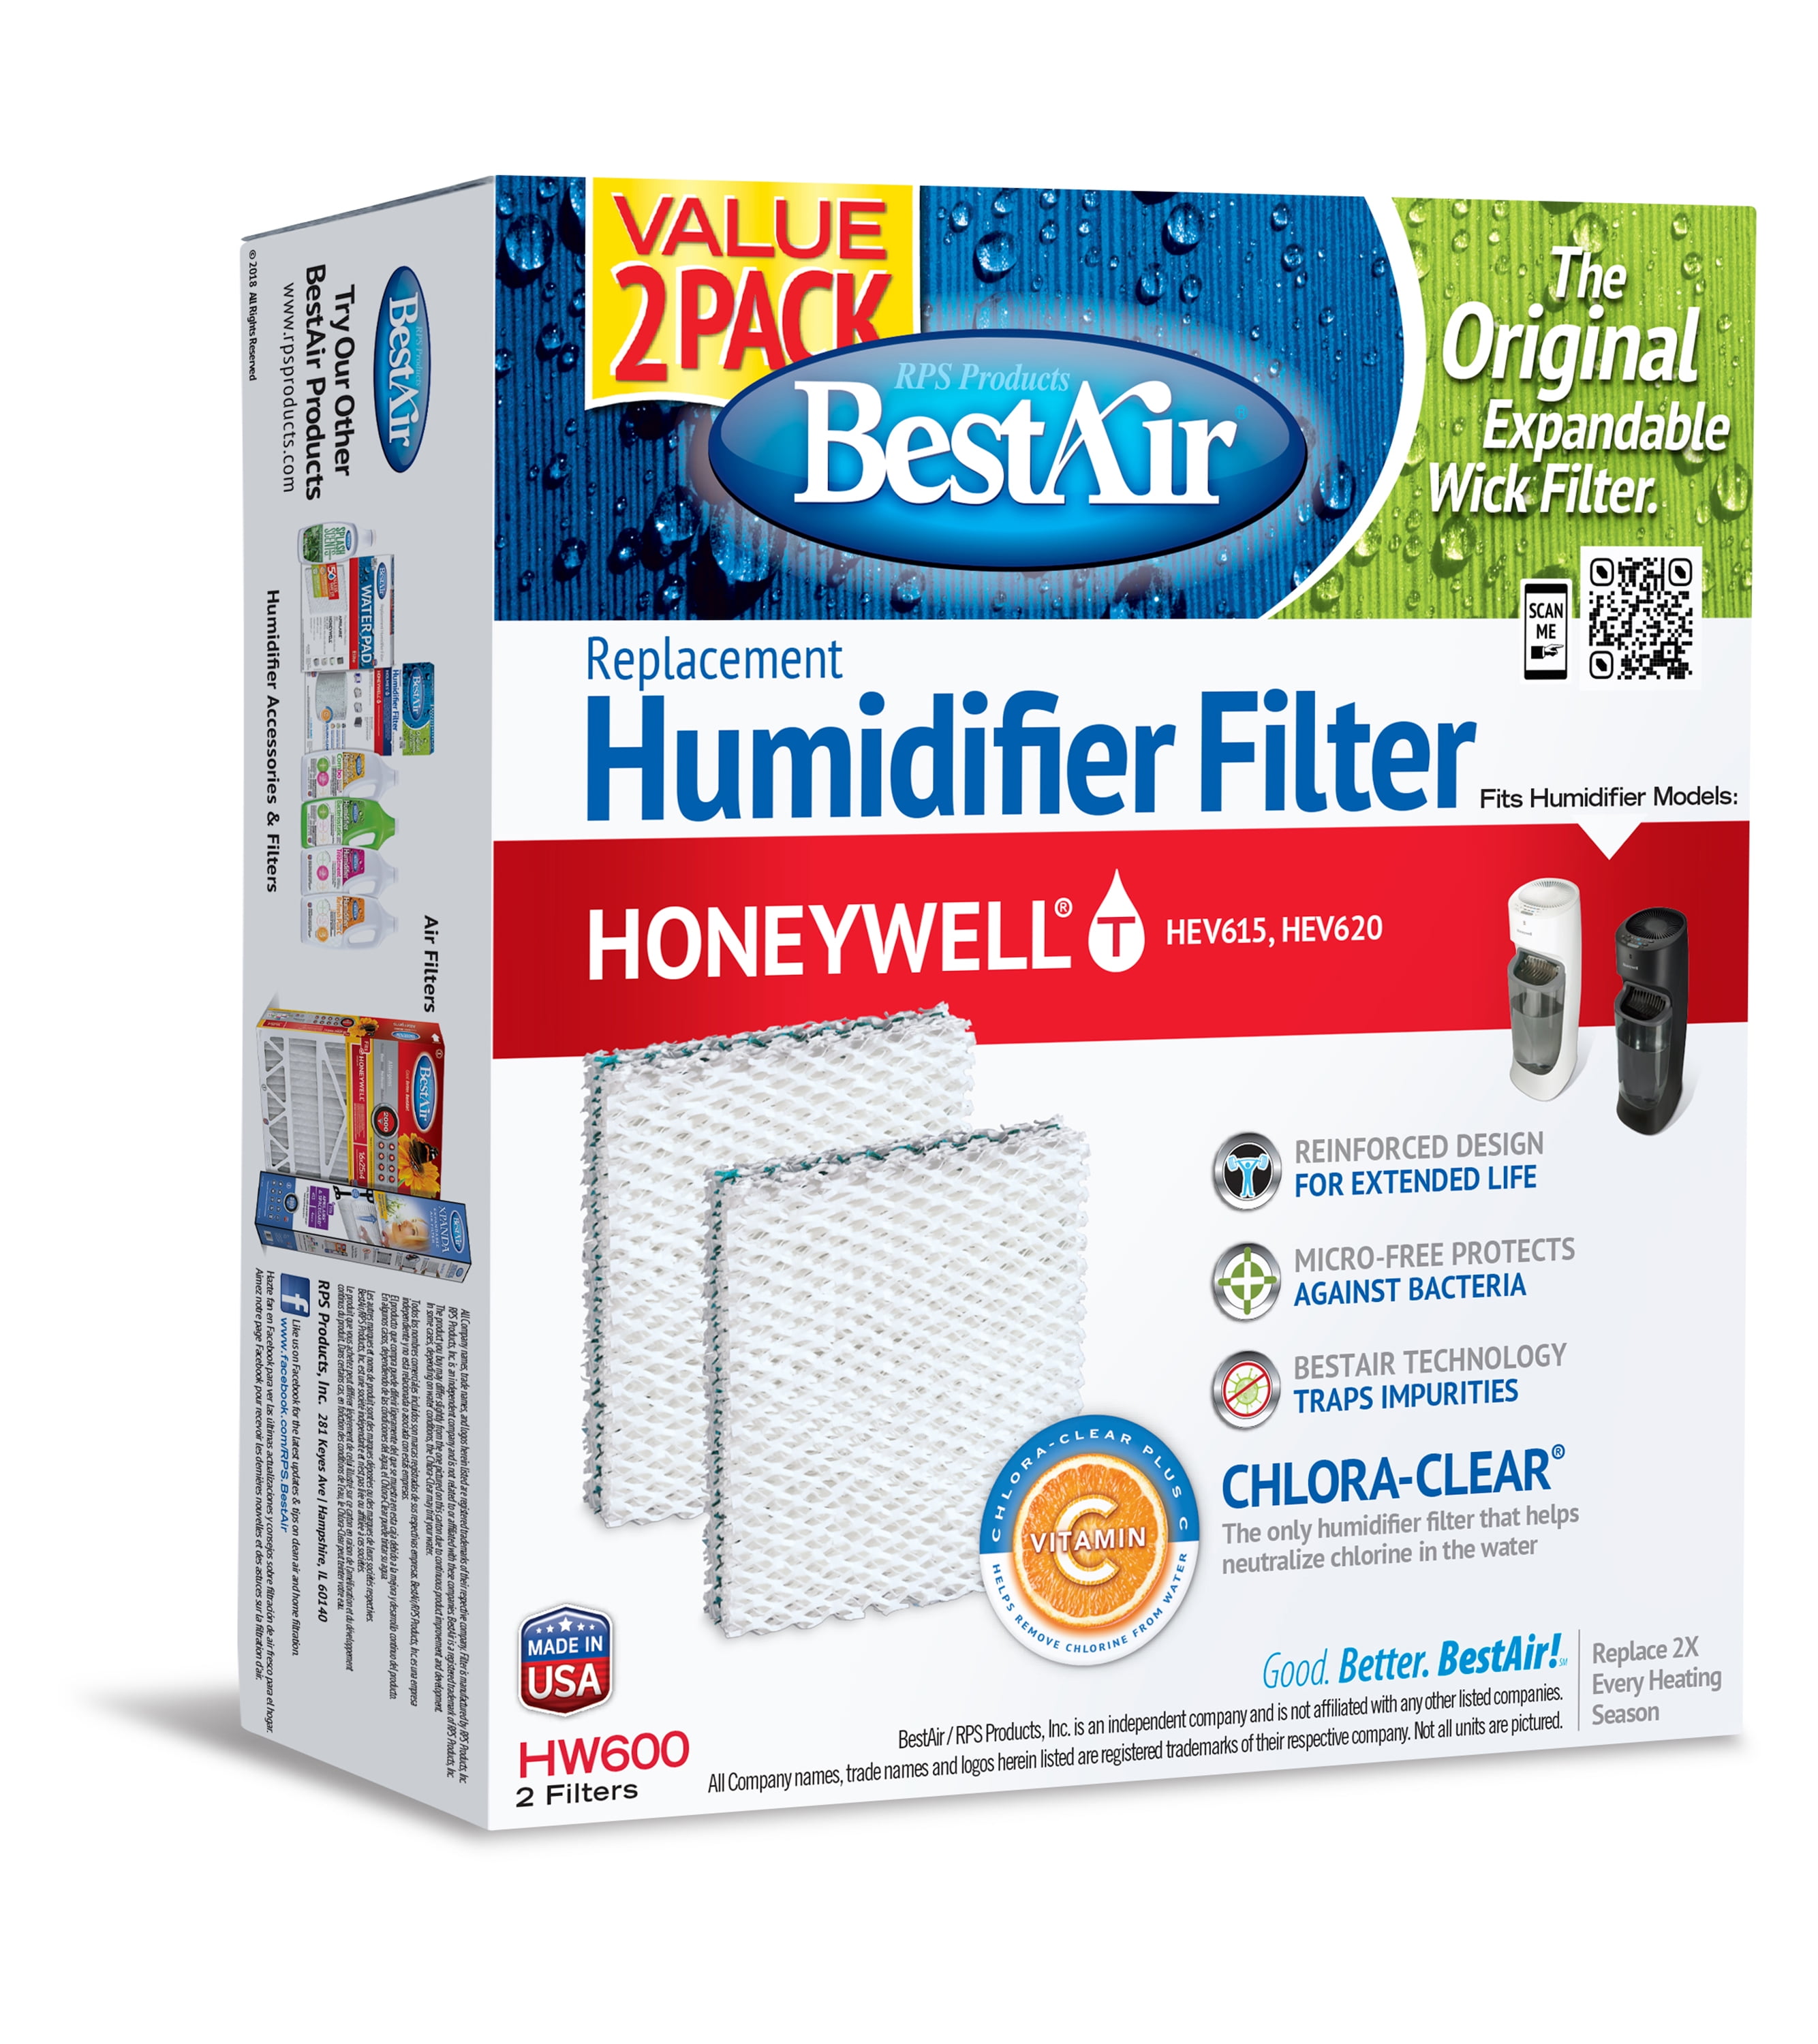 BestAir HW600 Value 2PK Humidifier Replacement Wick Filter for Honeywell models 6.4" x 2.8" x 8.6"